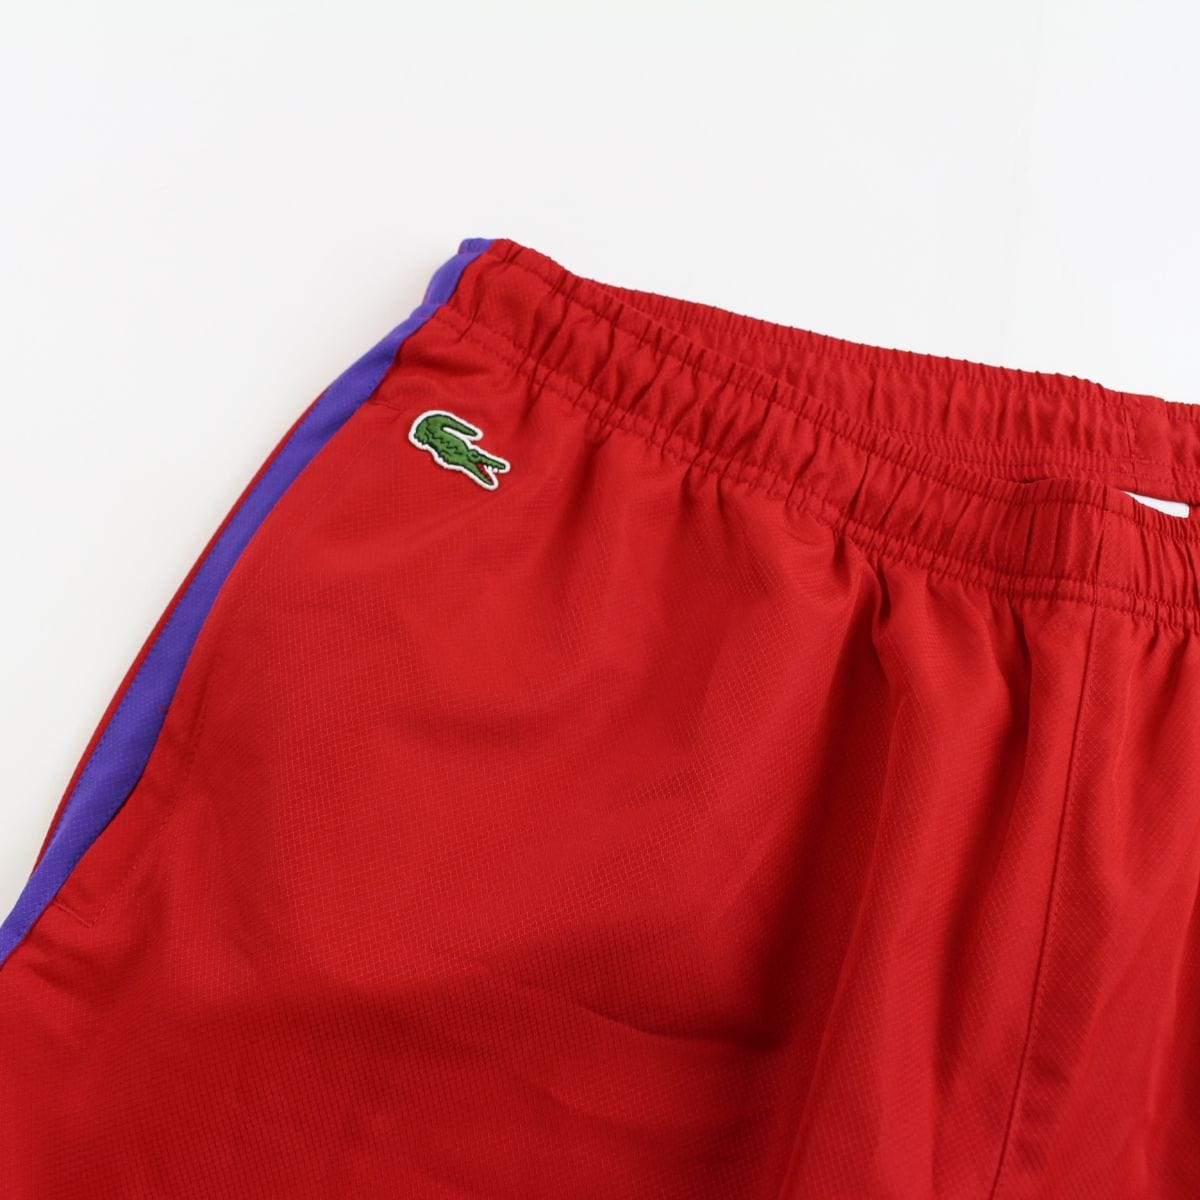 supreme x lacoste track pants red - SaruGeneral